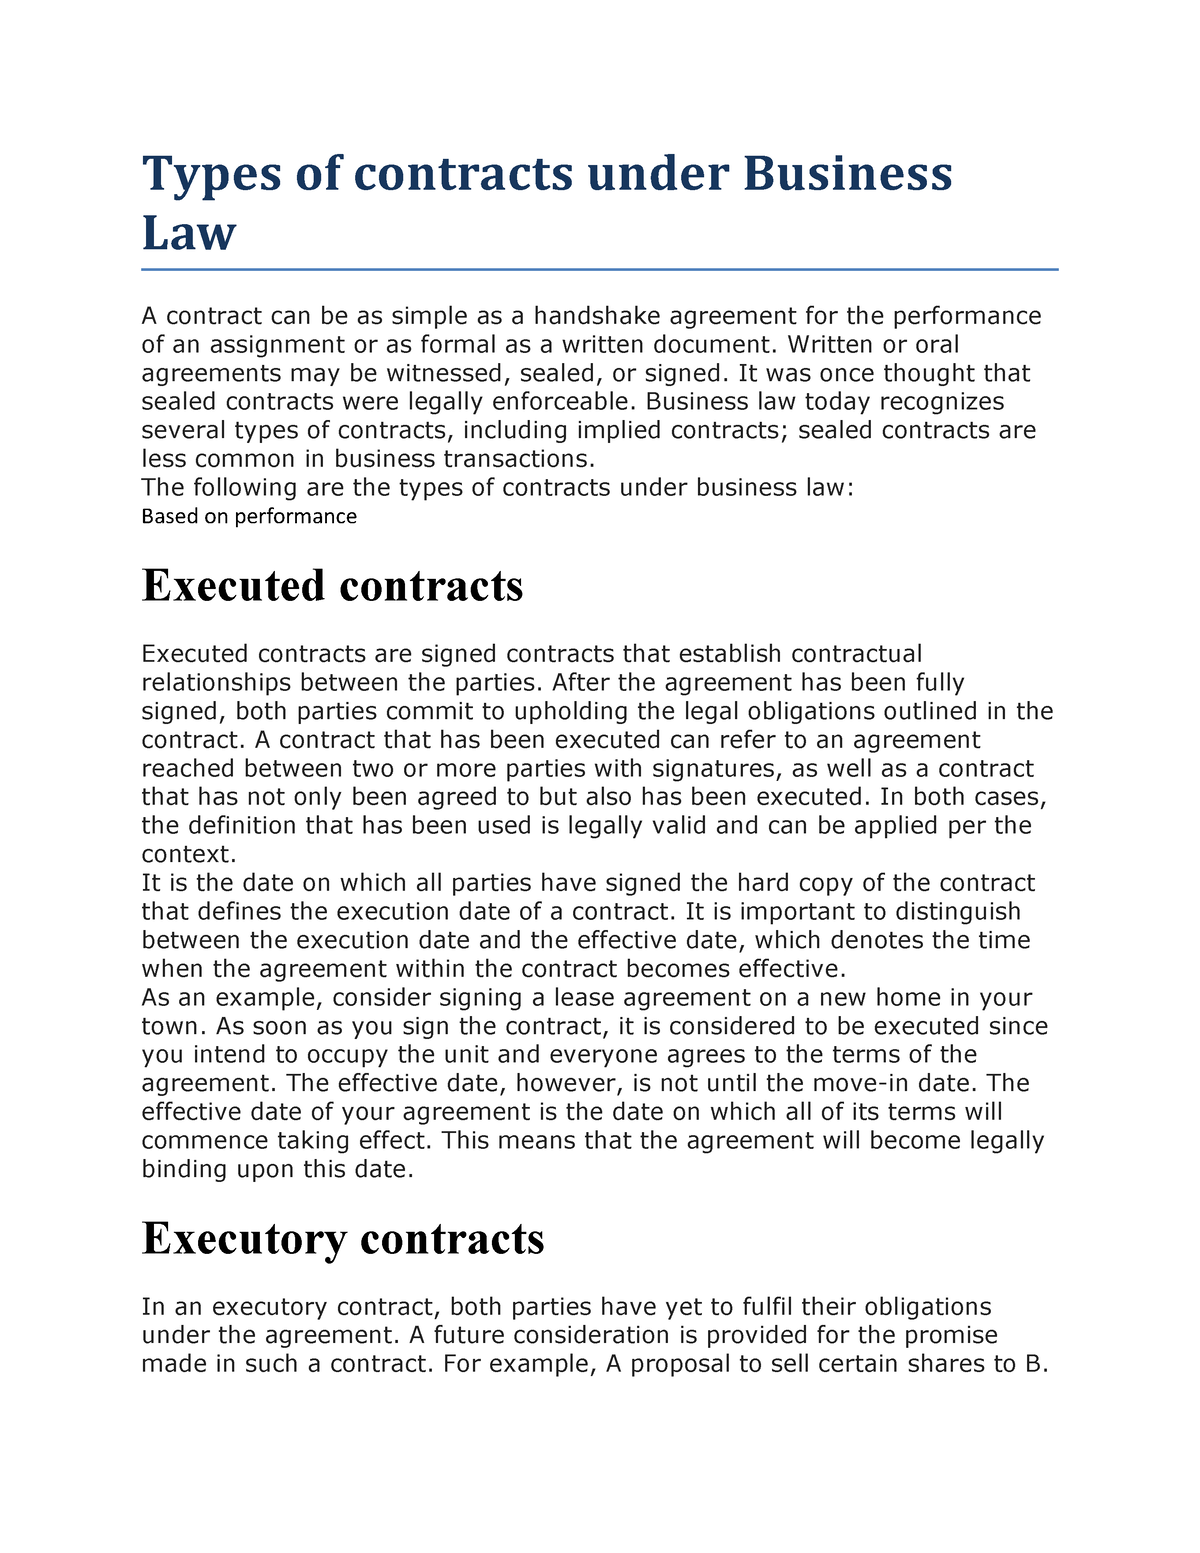 assignment worksheet 11.2 types of contracts